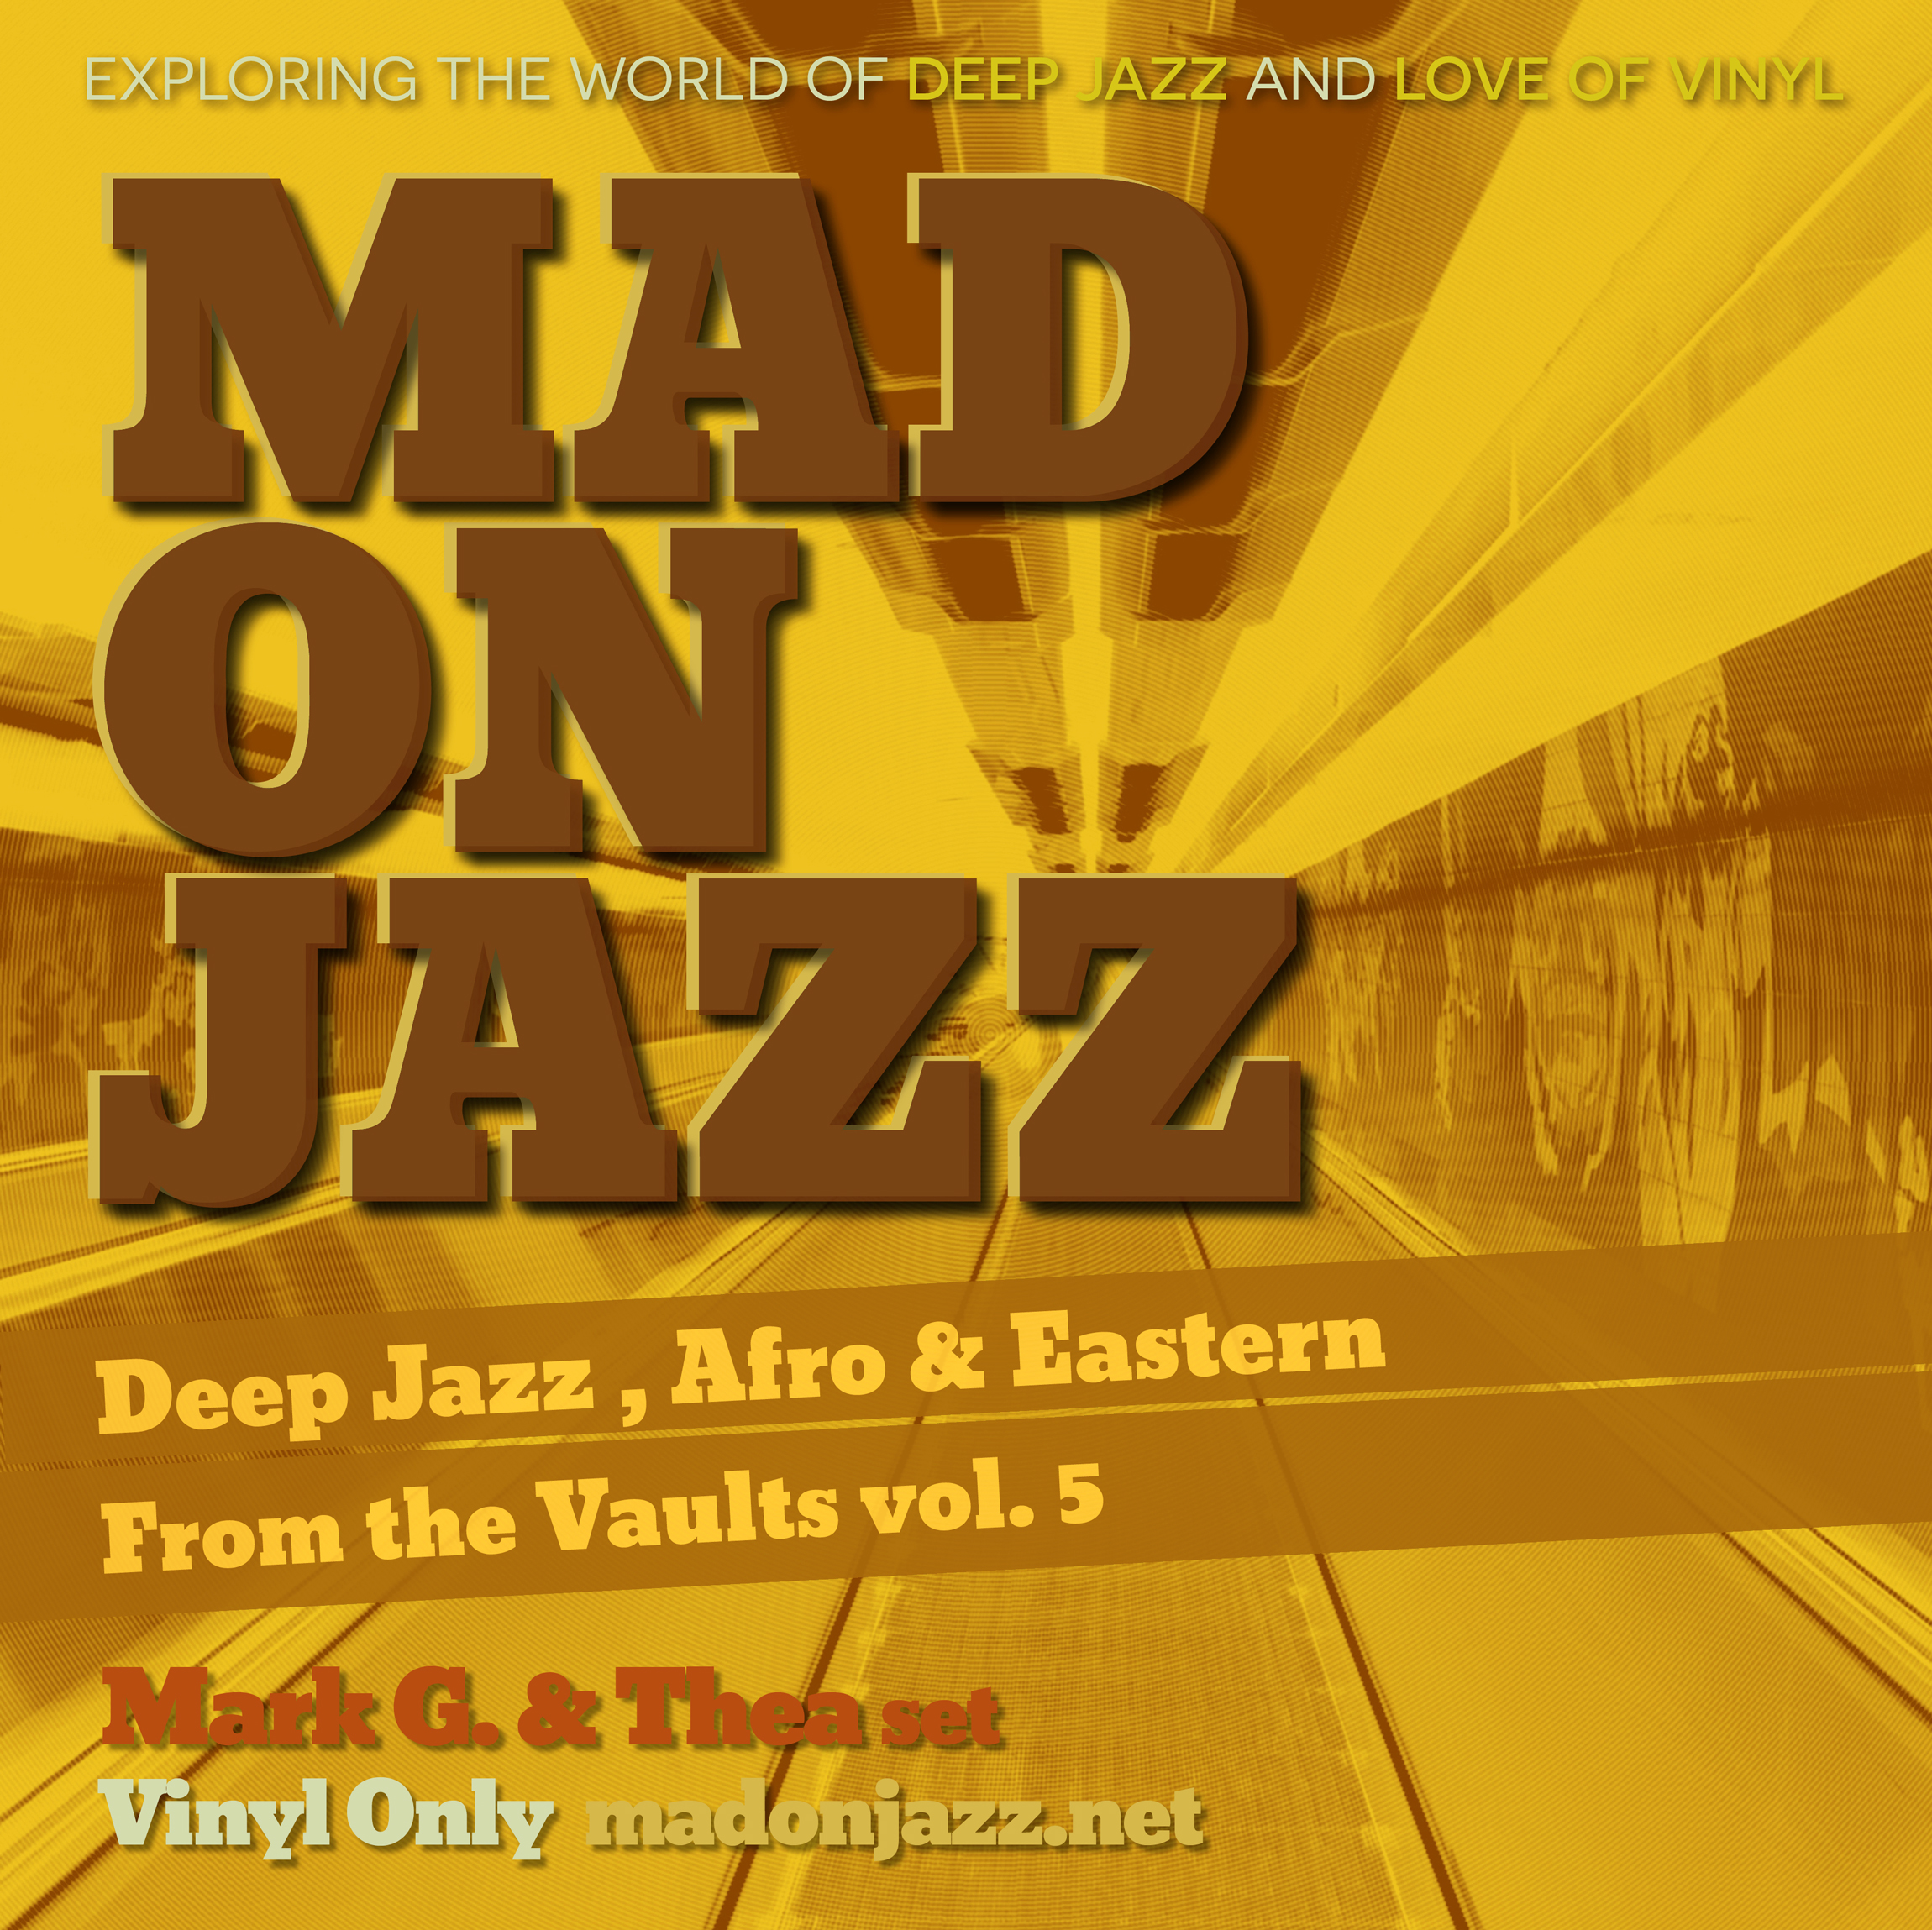 MADONJAZZ From the Vaults vol. 5 - Deep Jazz, Afro & Eastern Sounds